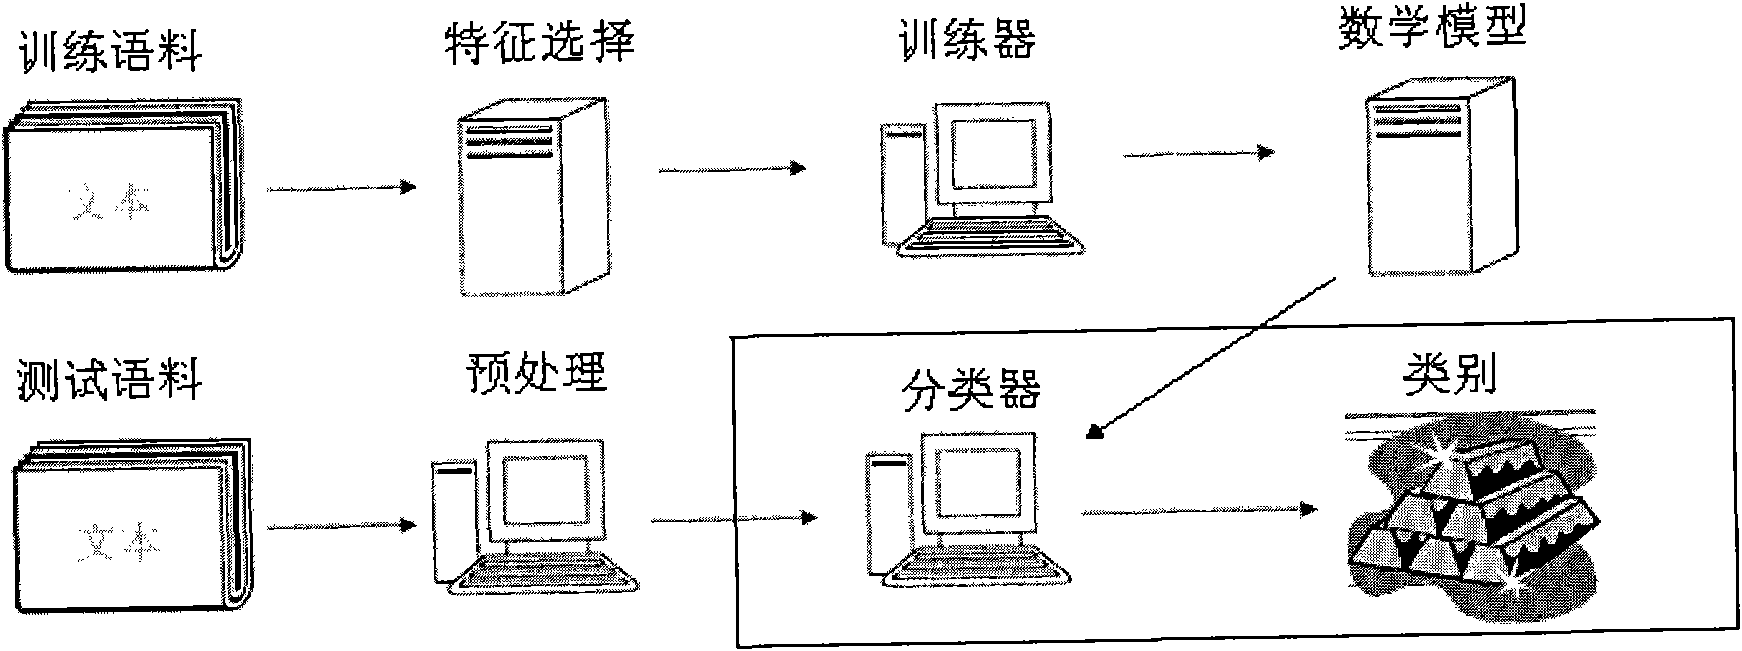 Method for automatically classifying academic documents